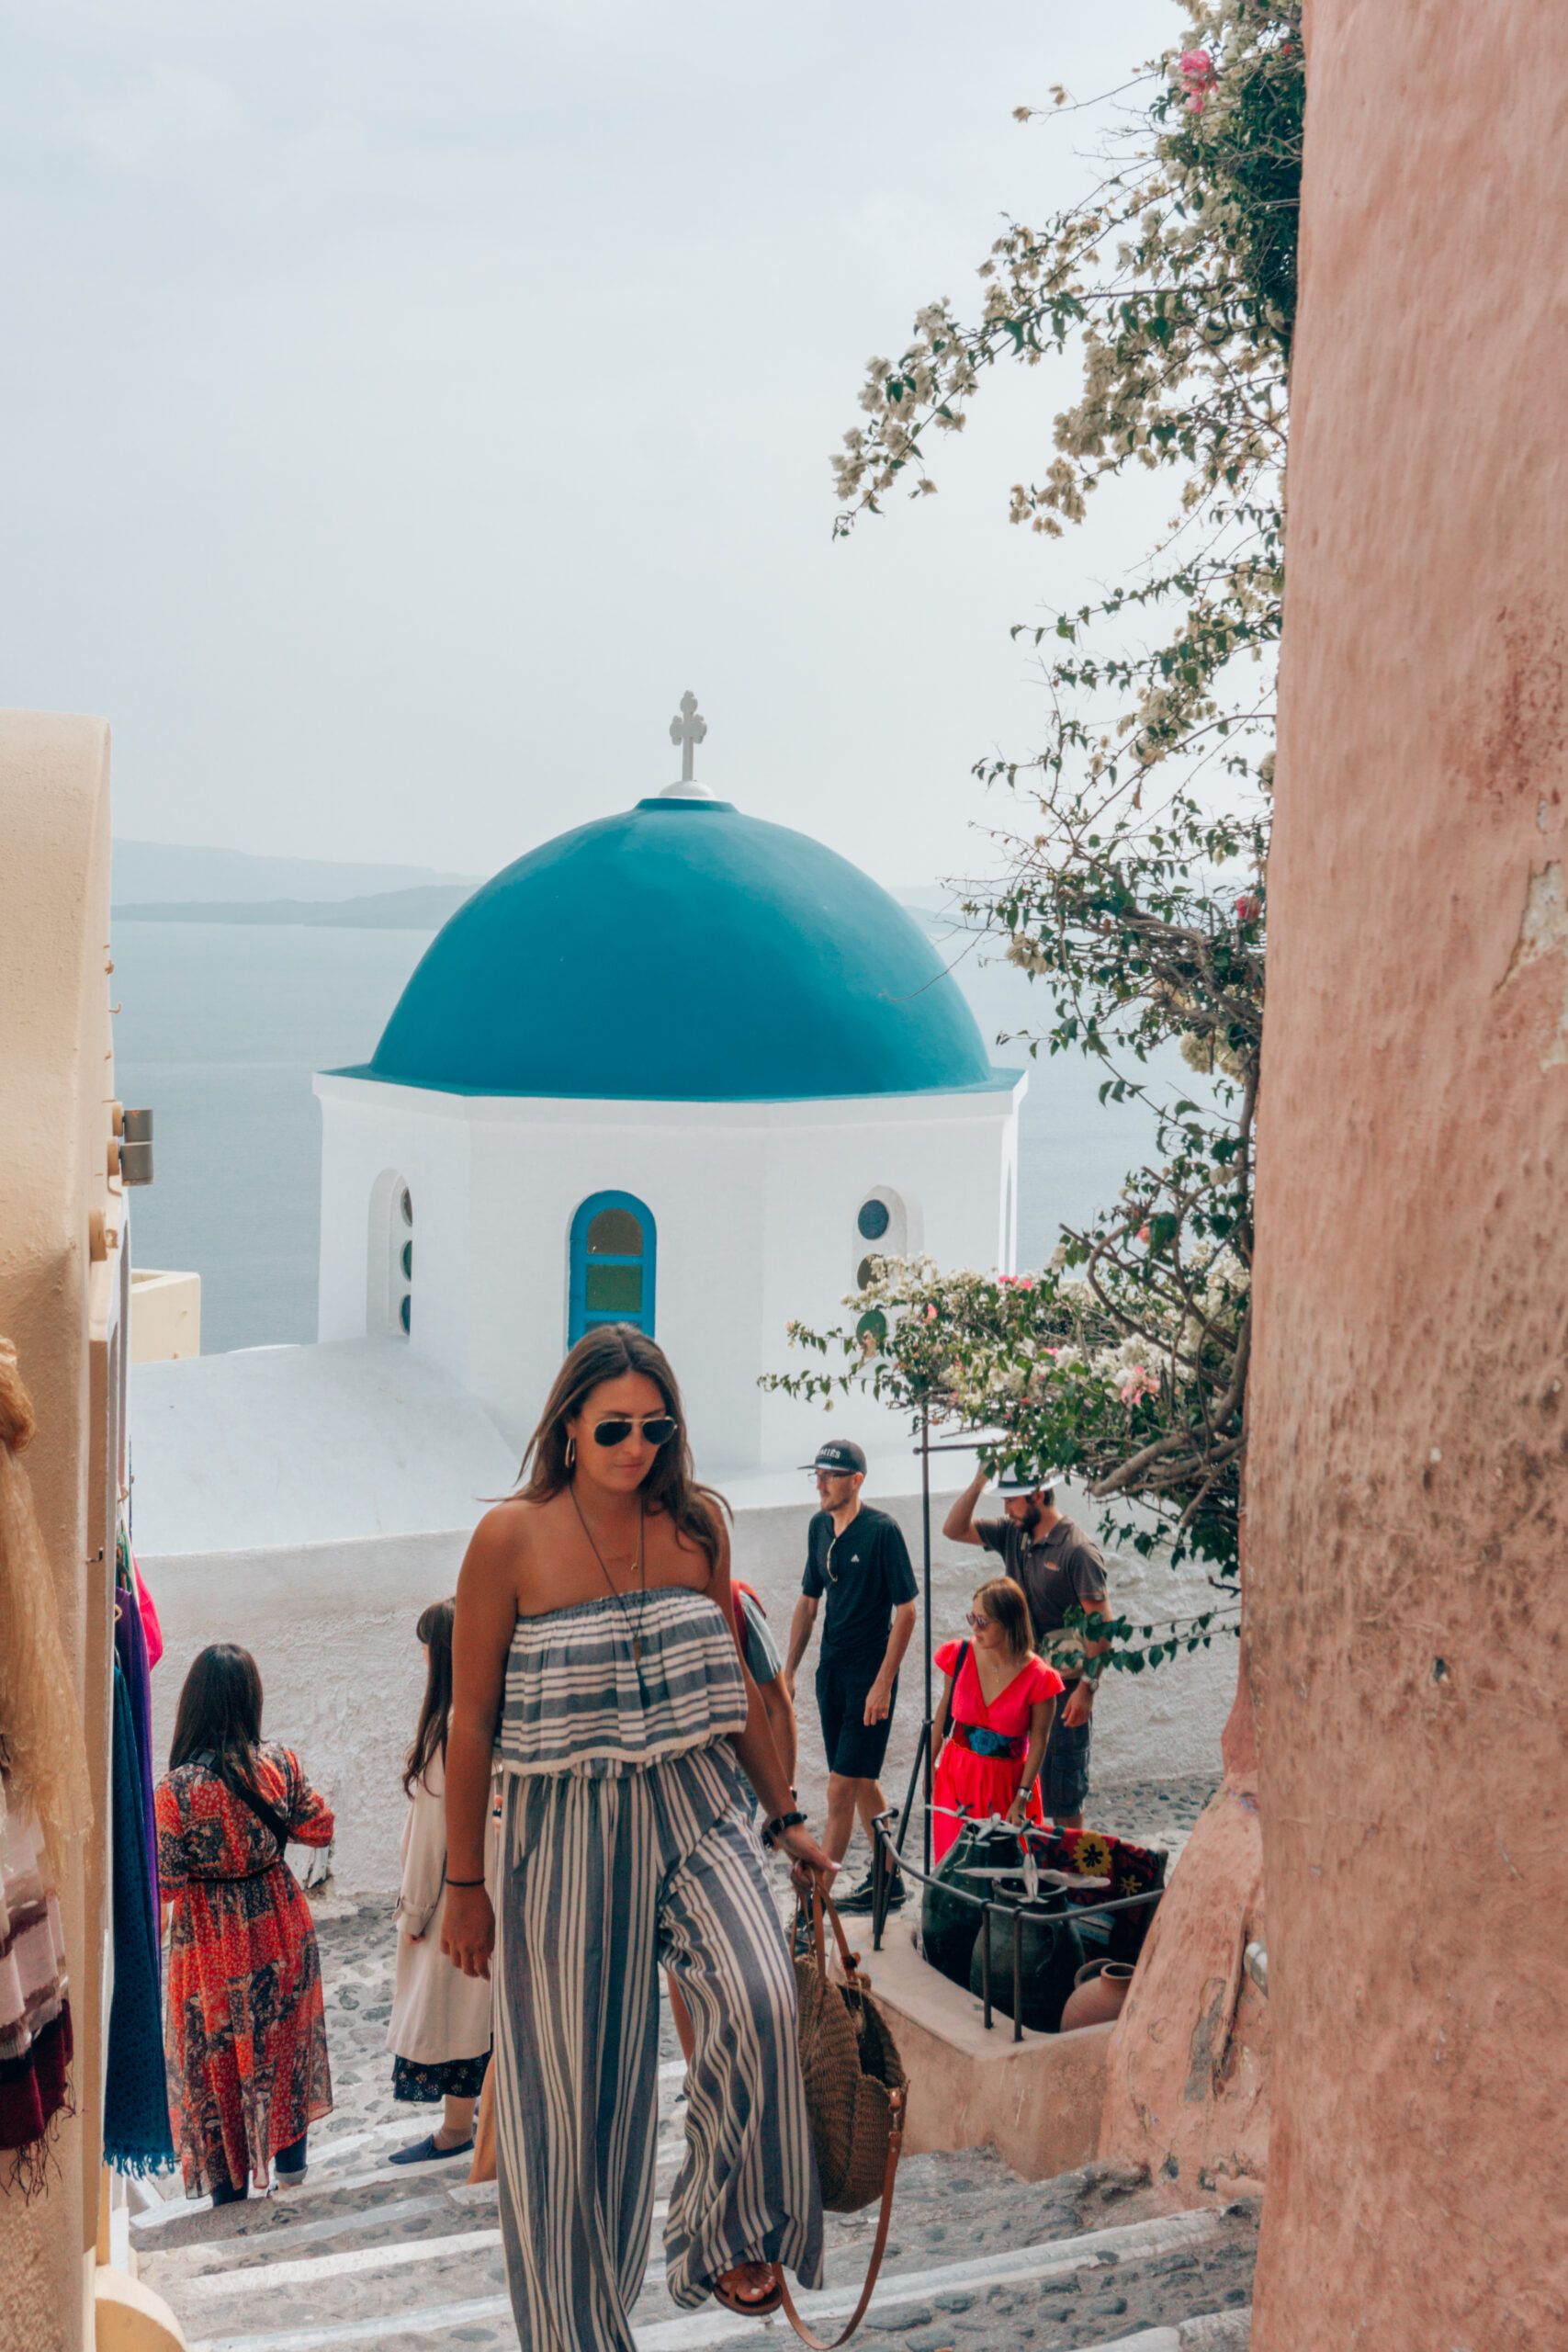 A girl wearing a stripped jumpsuit walks through the streets of Santorini, Greece with a classic blue domed church behind her. 